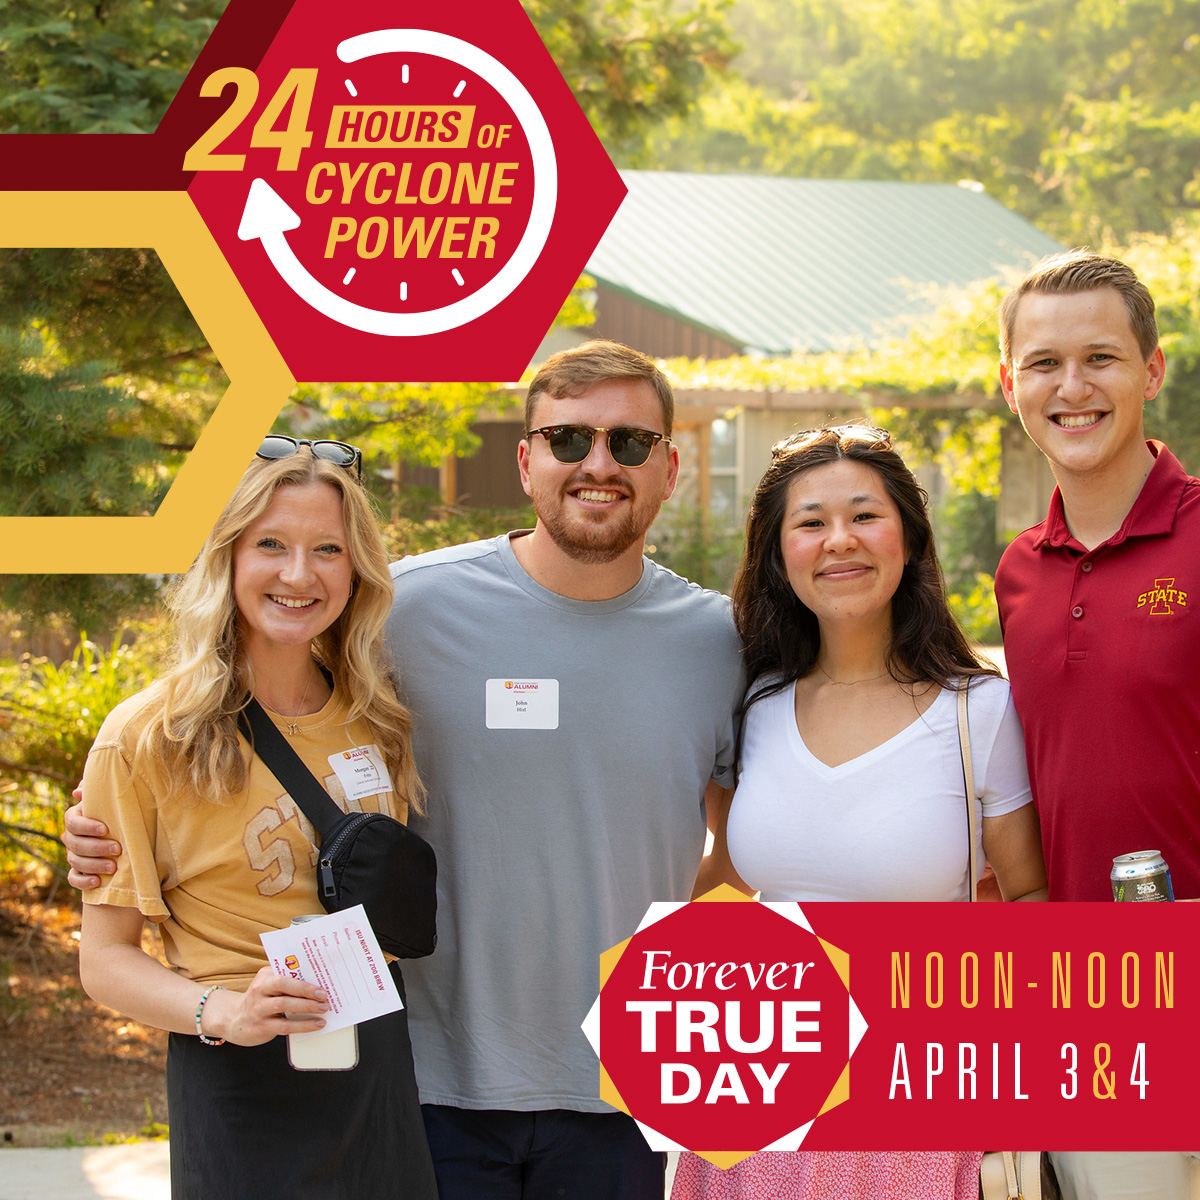 What's another way your alumni association touches the lives of Cyclones near you? We engage 42,000+ dues-paying members through storytelling in Iowa Stater magazine, our online directory, and member pricing to events. 𝗠𝗔𝗞𝗘 𝗔 𝗚𝗜𝗙𝗧 ➡️ forevertrueday.com/alumni